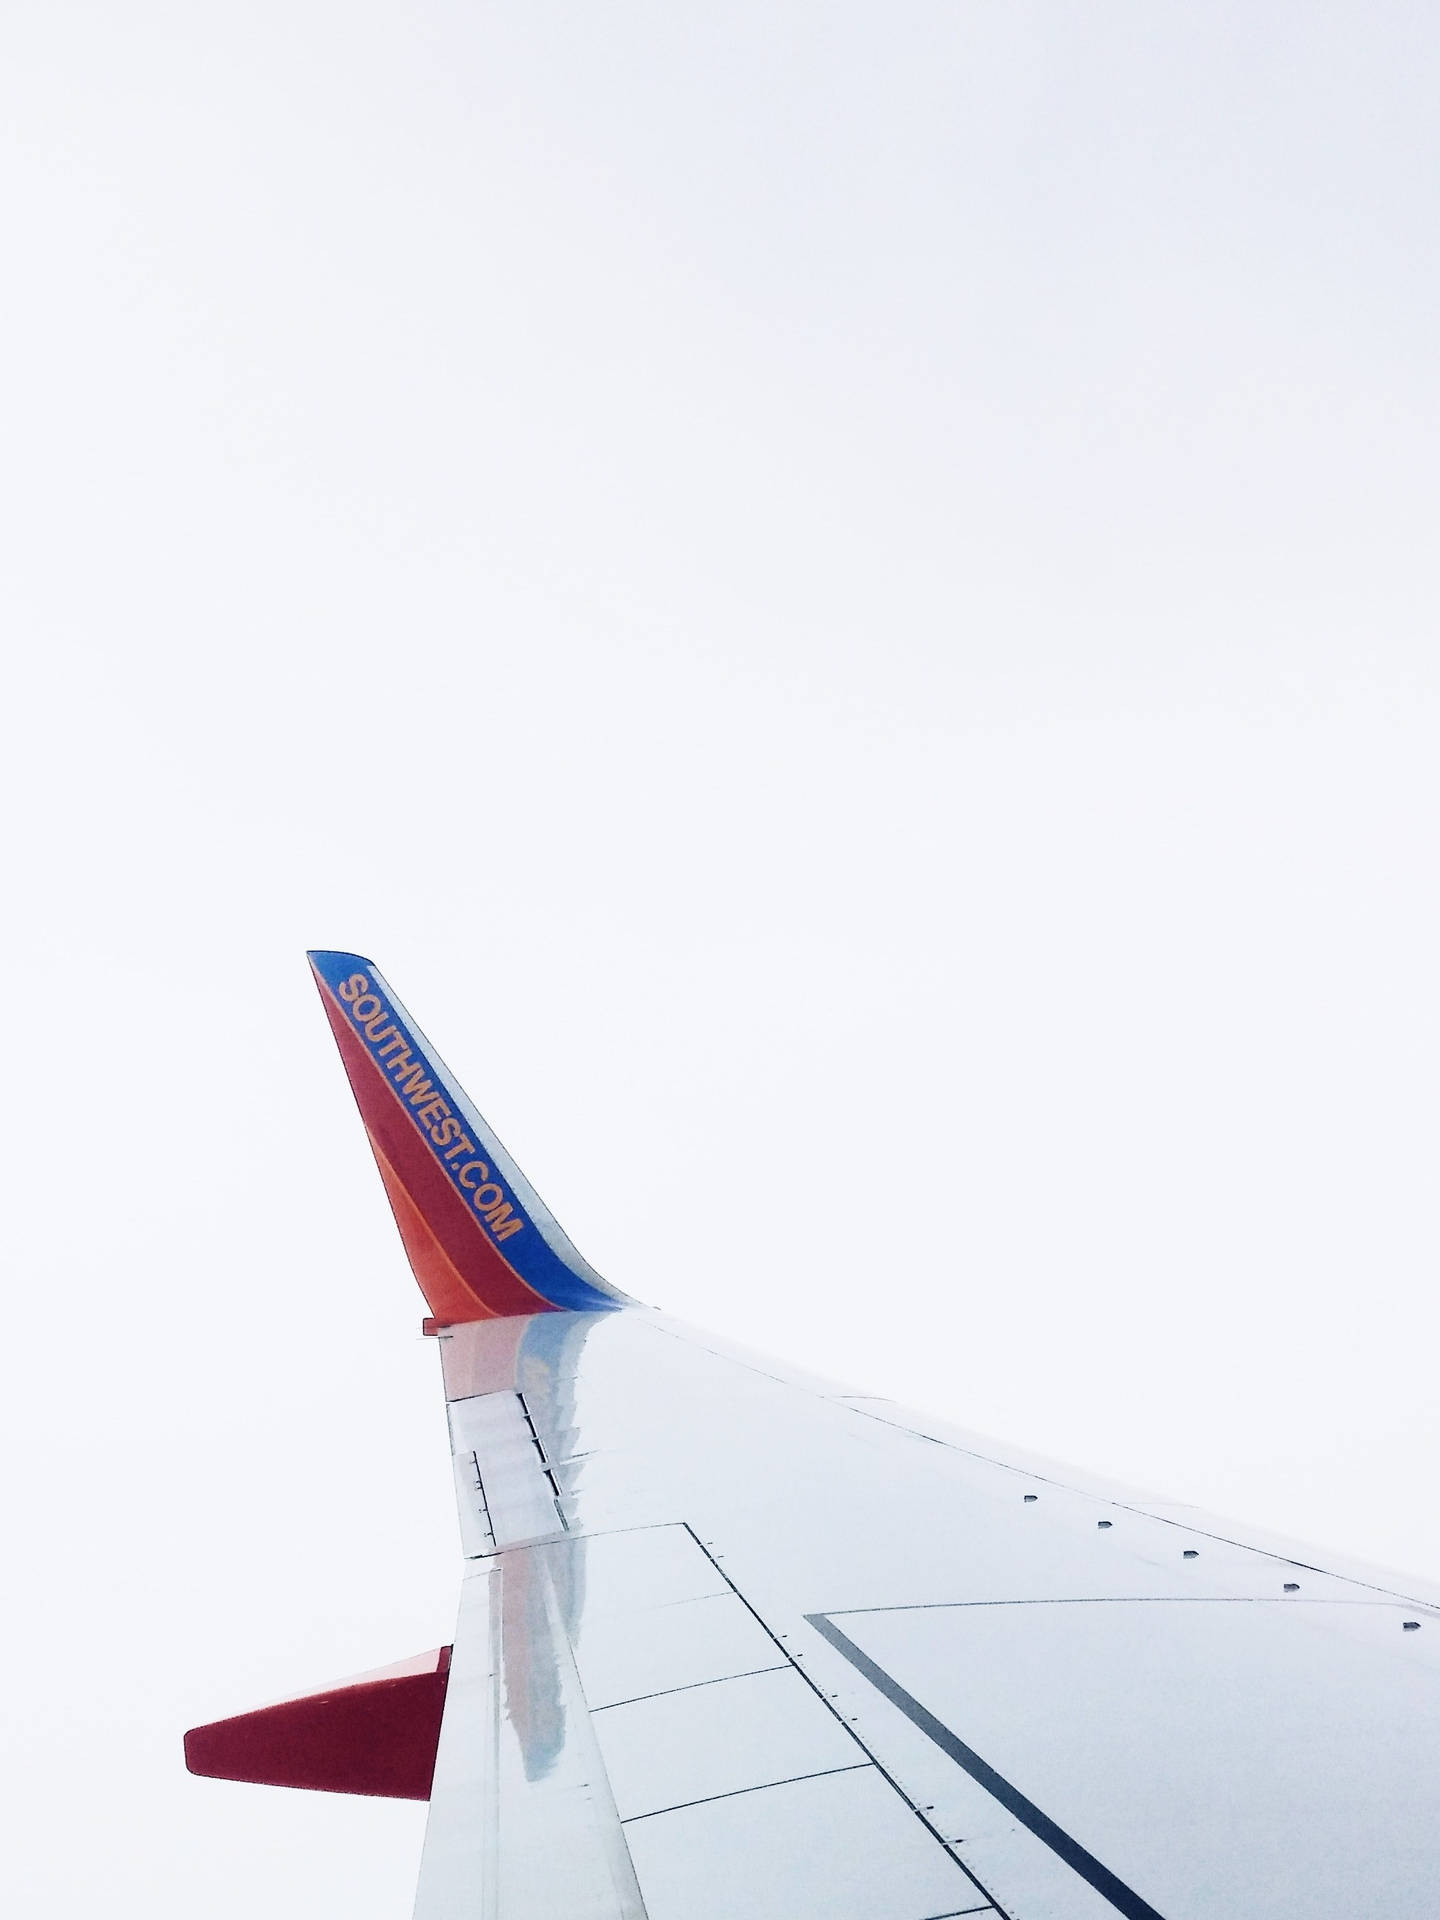 Southwest Airlines 2118 X 2824 Wallpaper